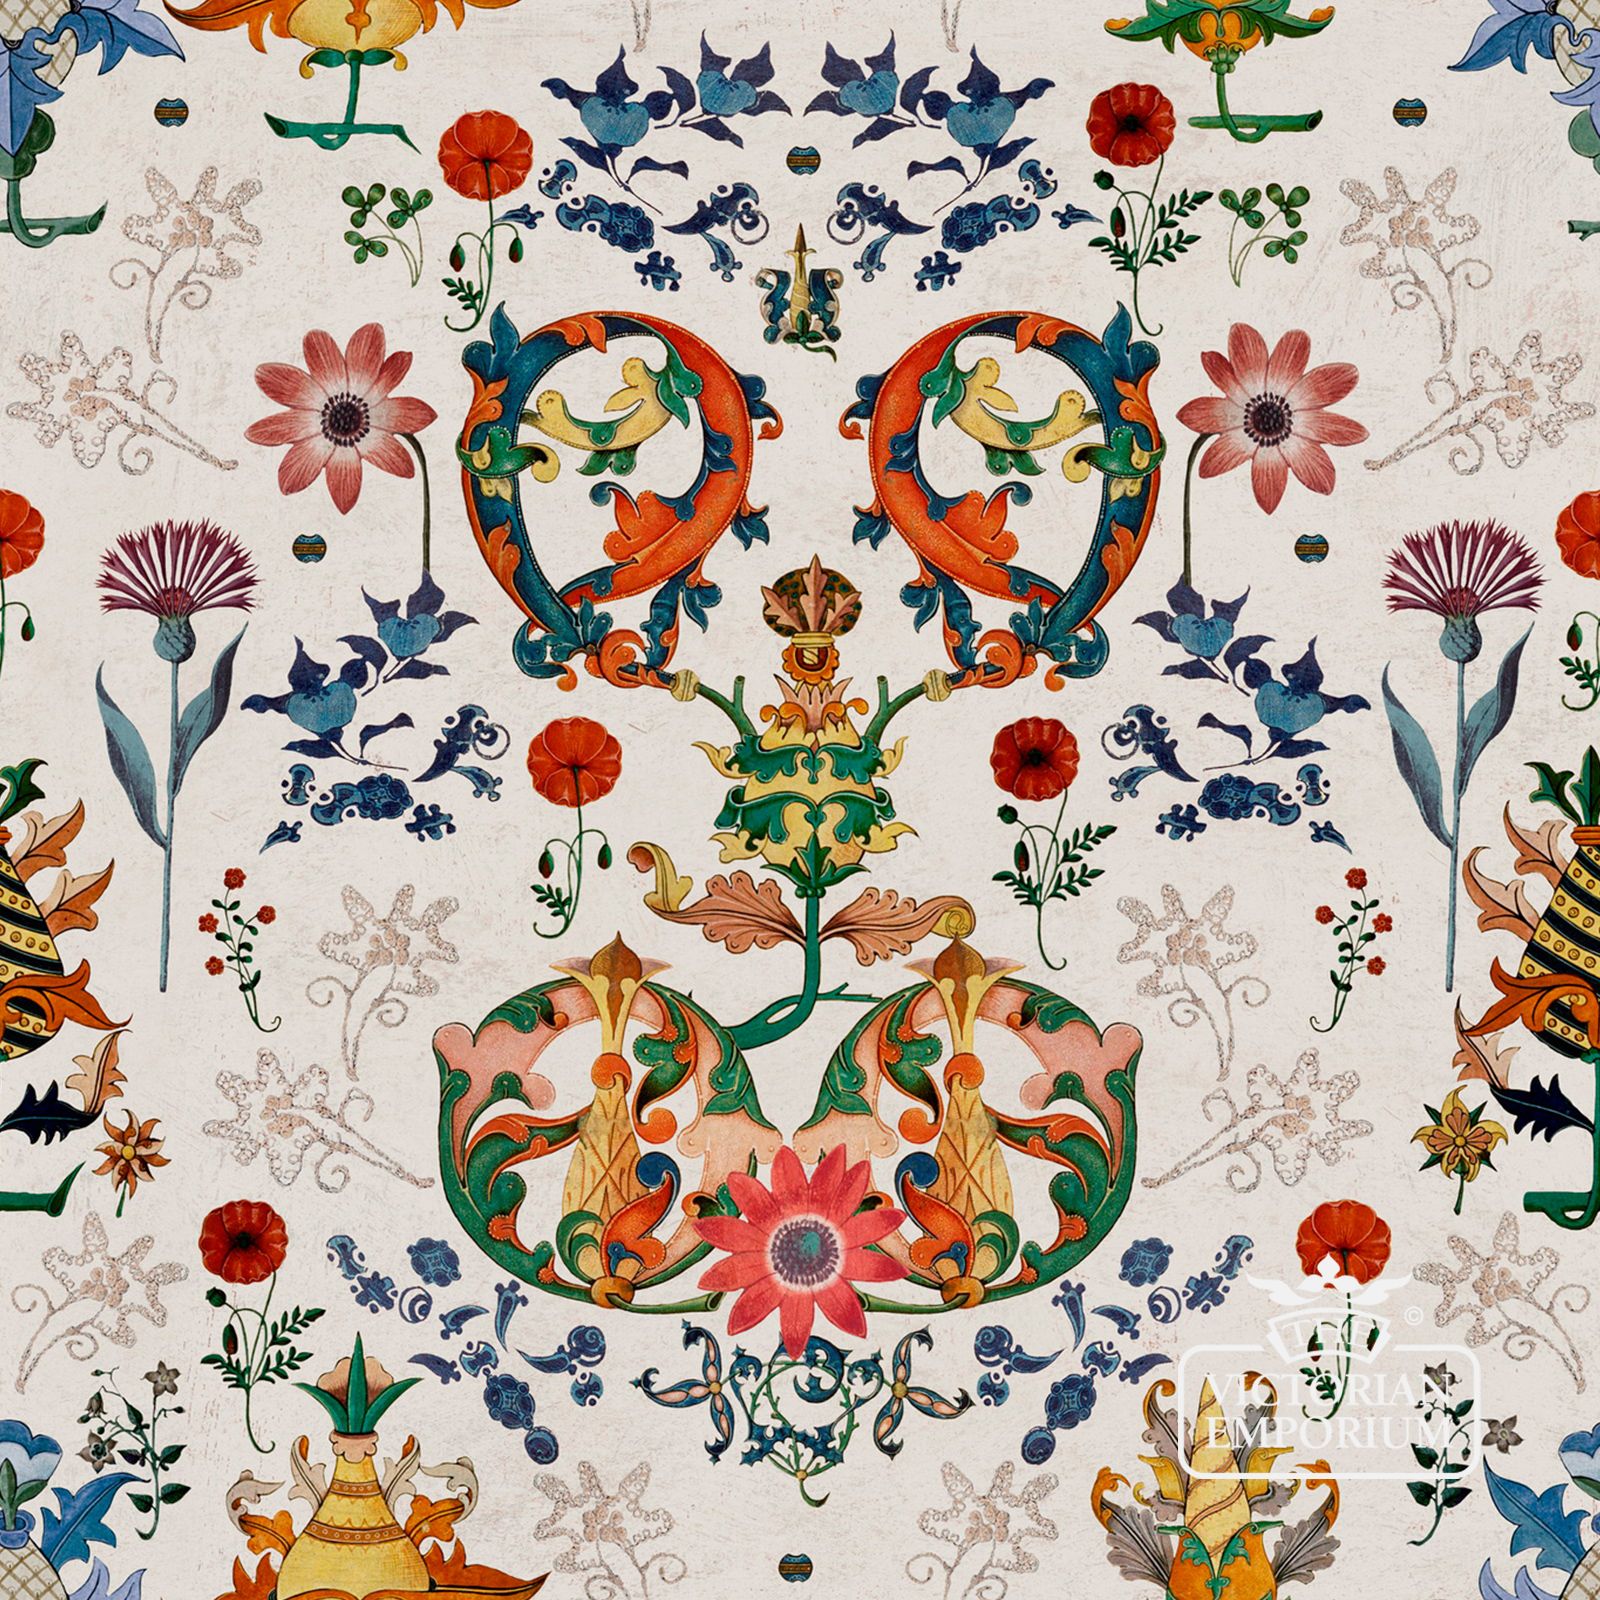 European Folk Wallpaper - featuring wild flowers and thistles with bold entwining foliage